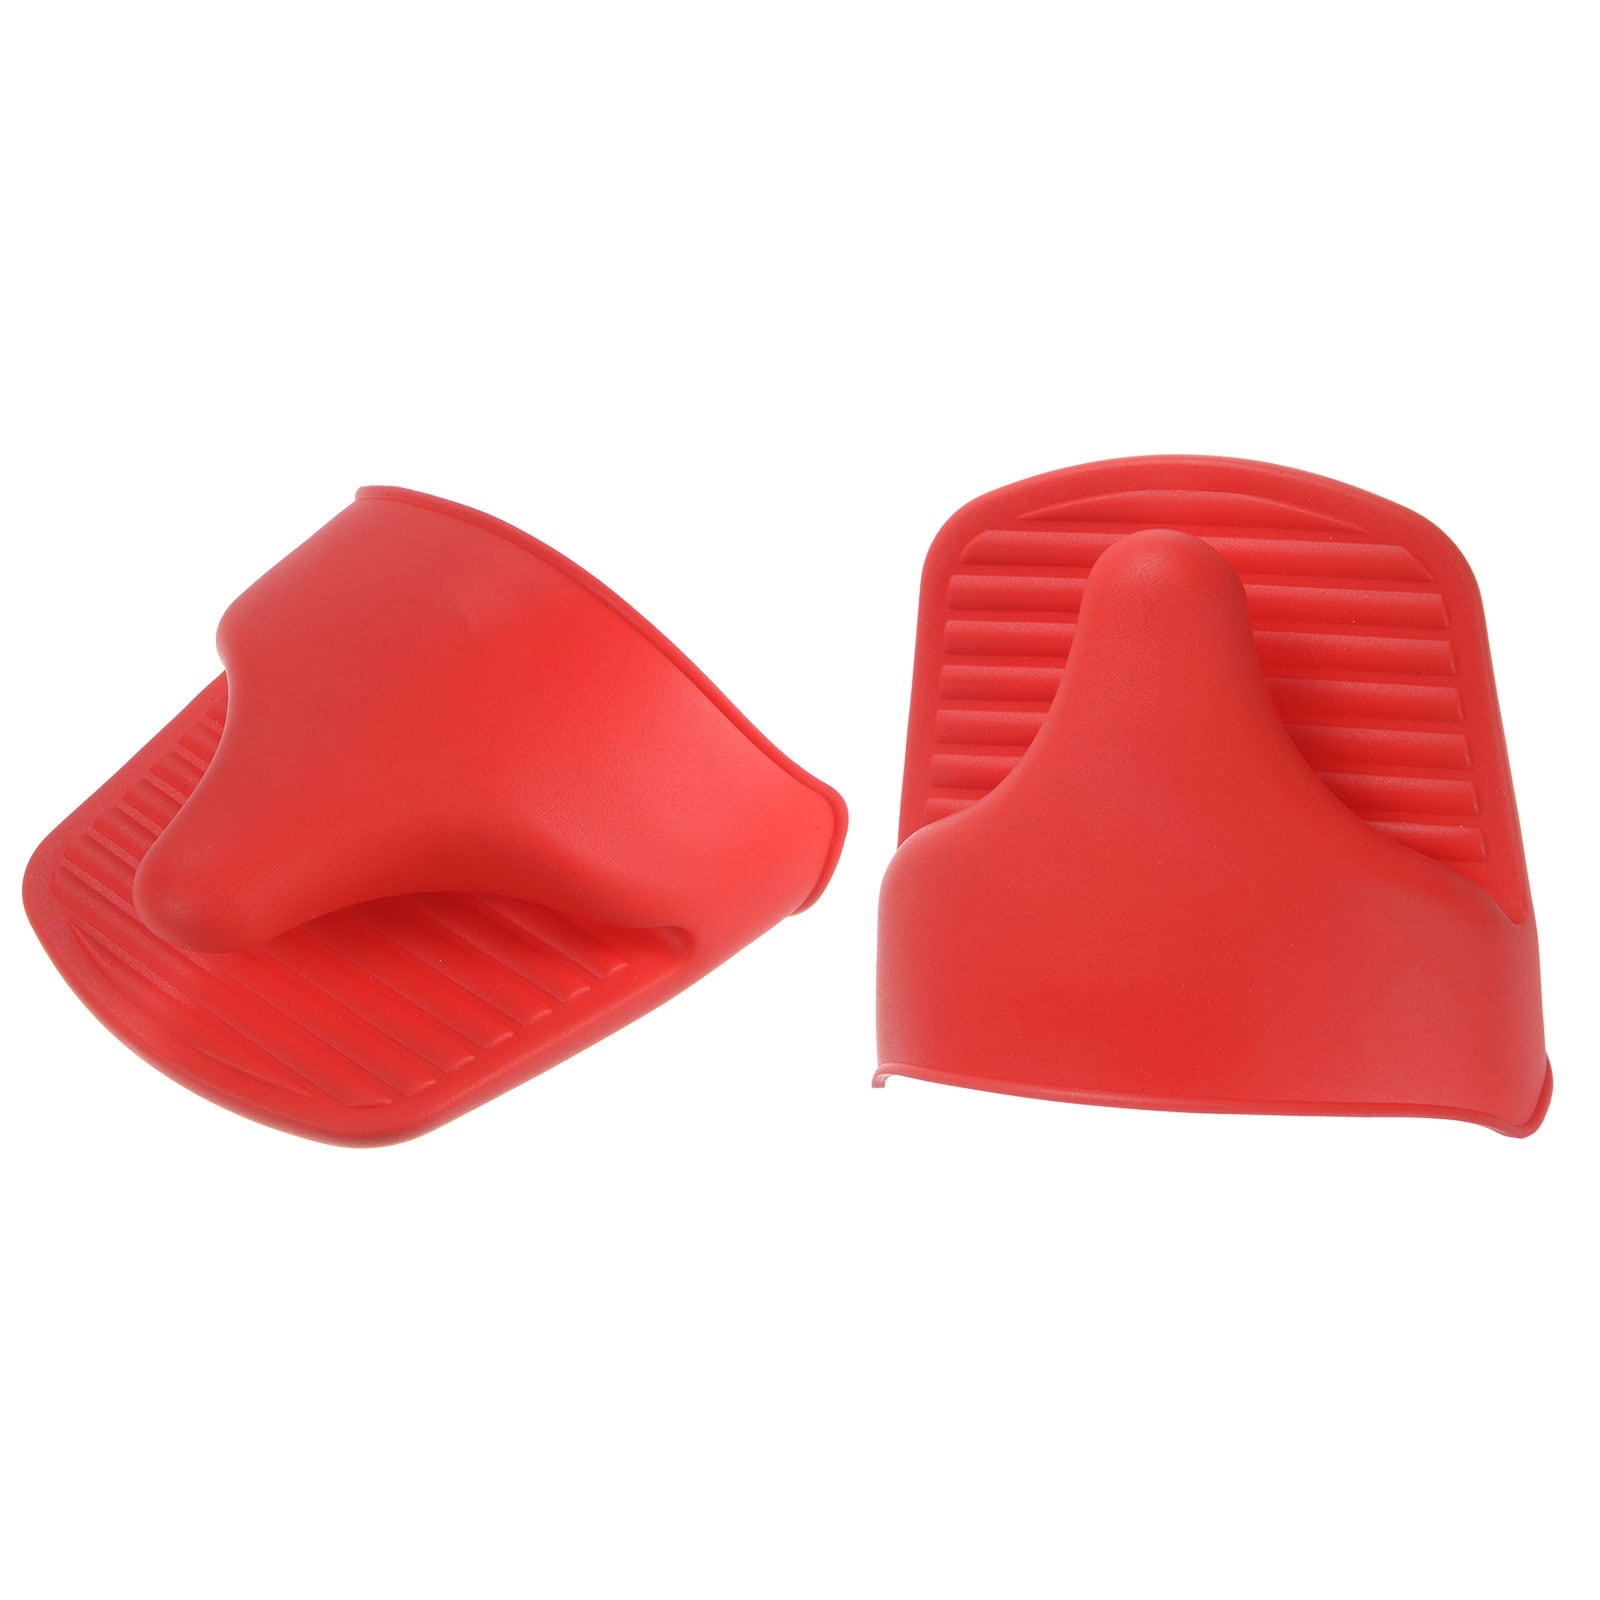 https://ak1.ostkcdn.com/images/products/is/images/direct/424e35ca40a74632717cdfc3013393aacc63943f/2pcs-Silicone-Oven-Gloves-Pot-Holder-Silicone-Oven-Mitts-Oven-Mitts.jpg